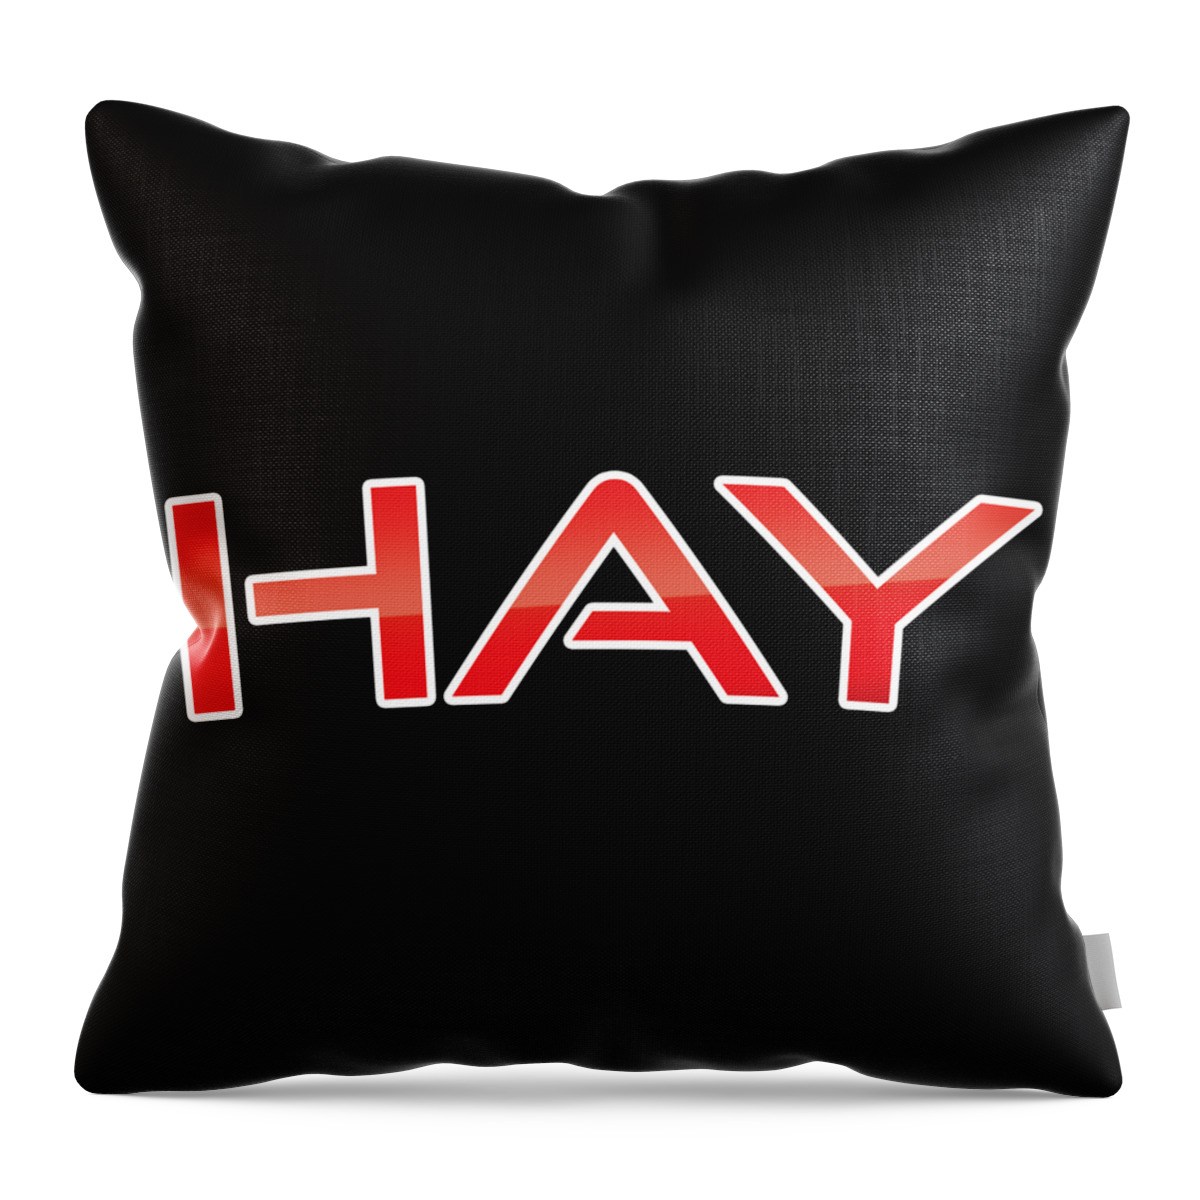 Hay Throw Pillow featuring the digital art Hay by TintoDesigns